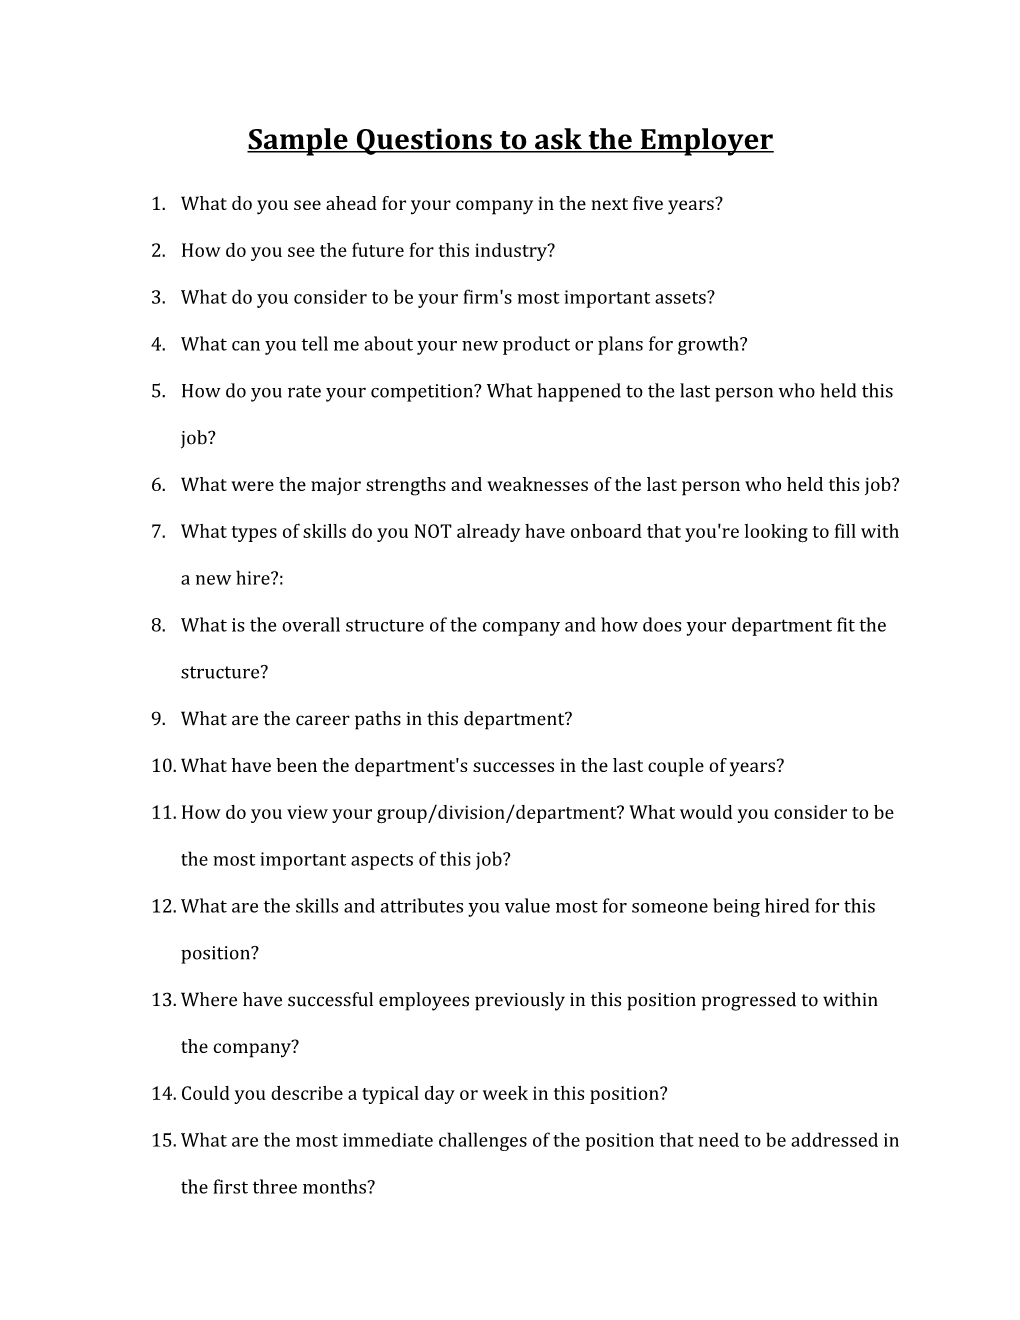 Sample Questions to Ask the Employer